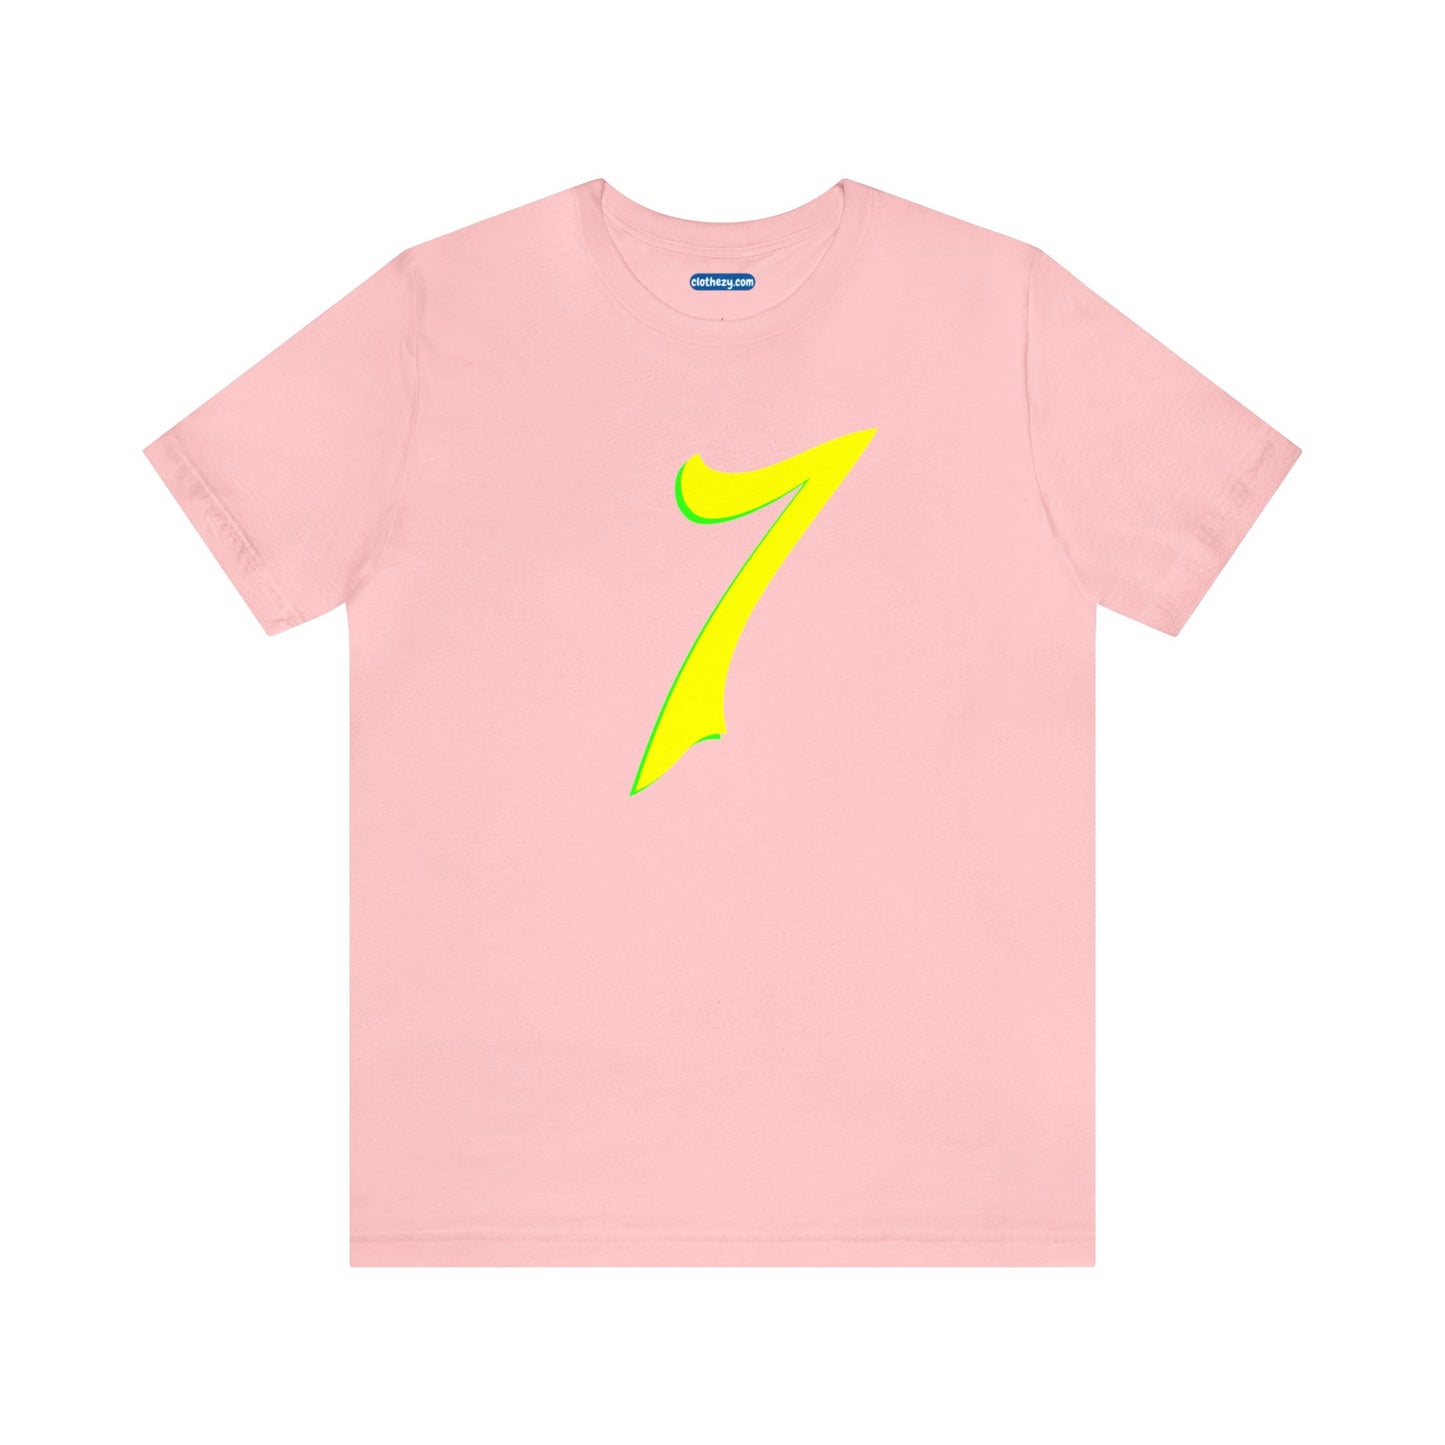 Number 7 Design - Soft Cotton Tee for birthdays and celebrations, Gift for friends and family, Multiple Options by clothezy.com in Pink Size Small - Buy Now